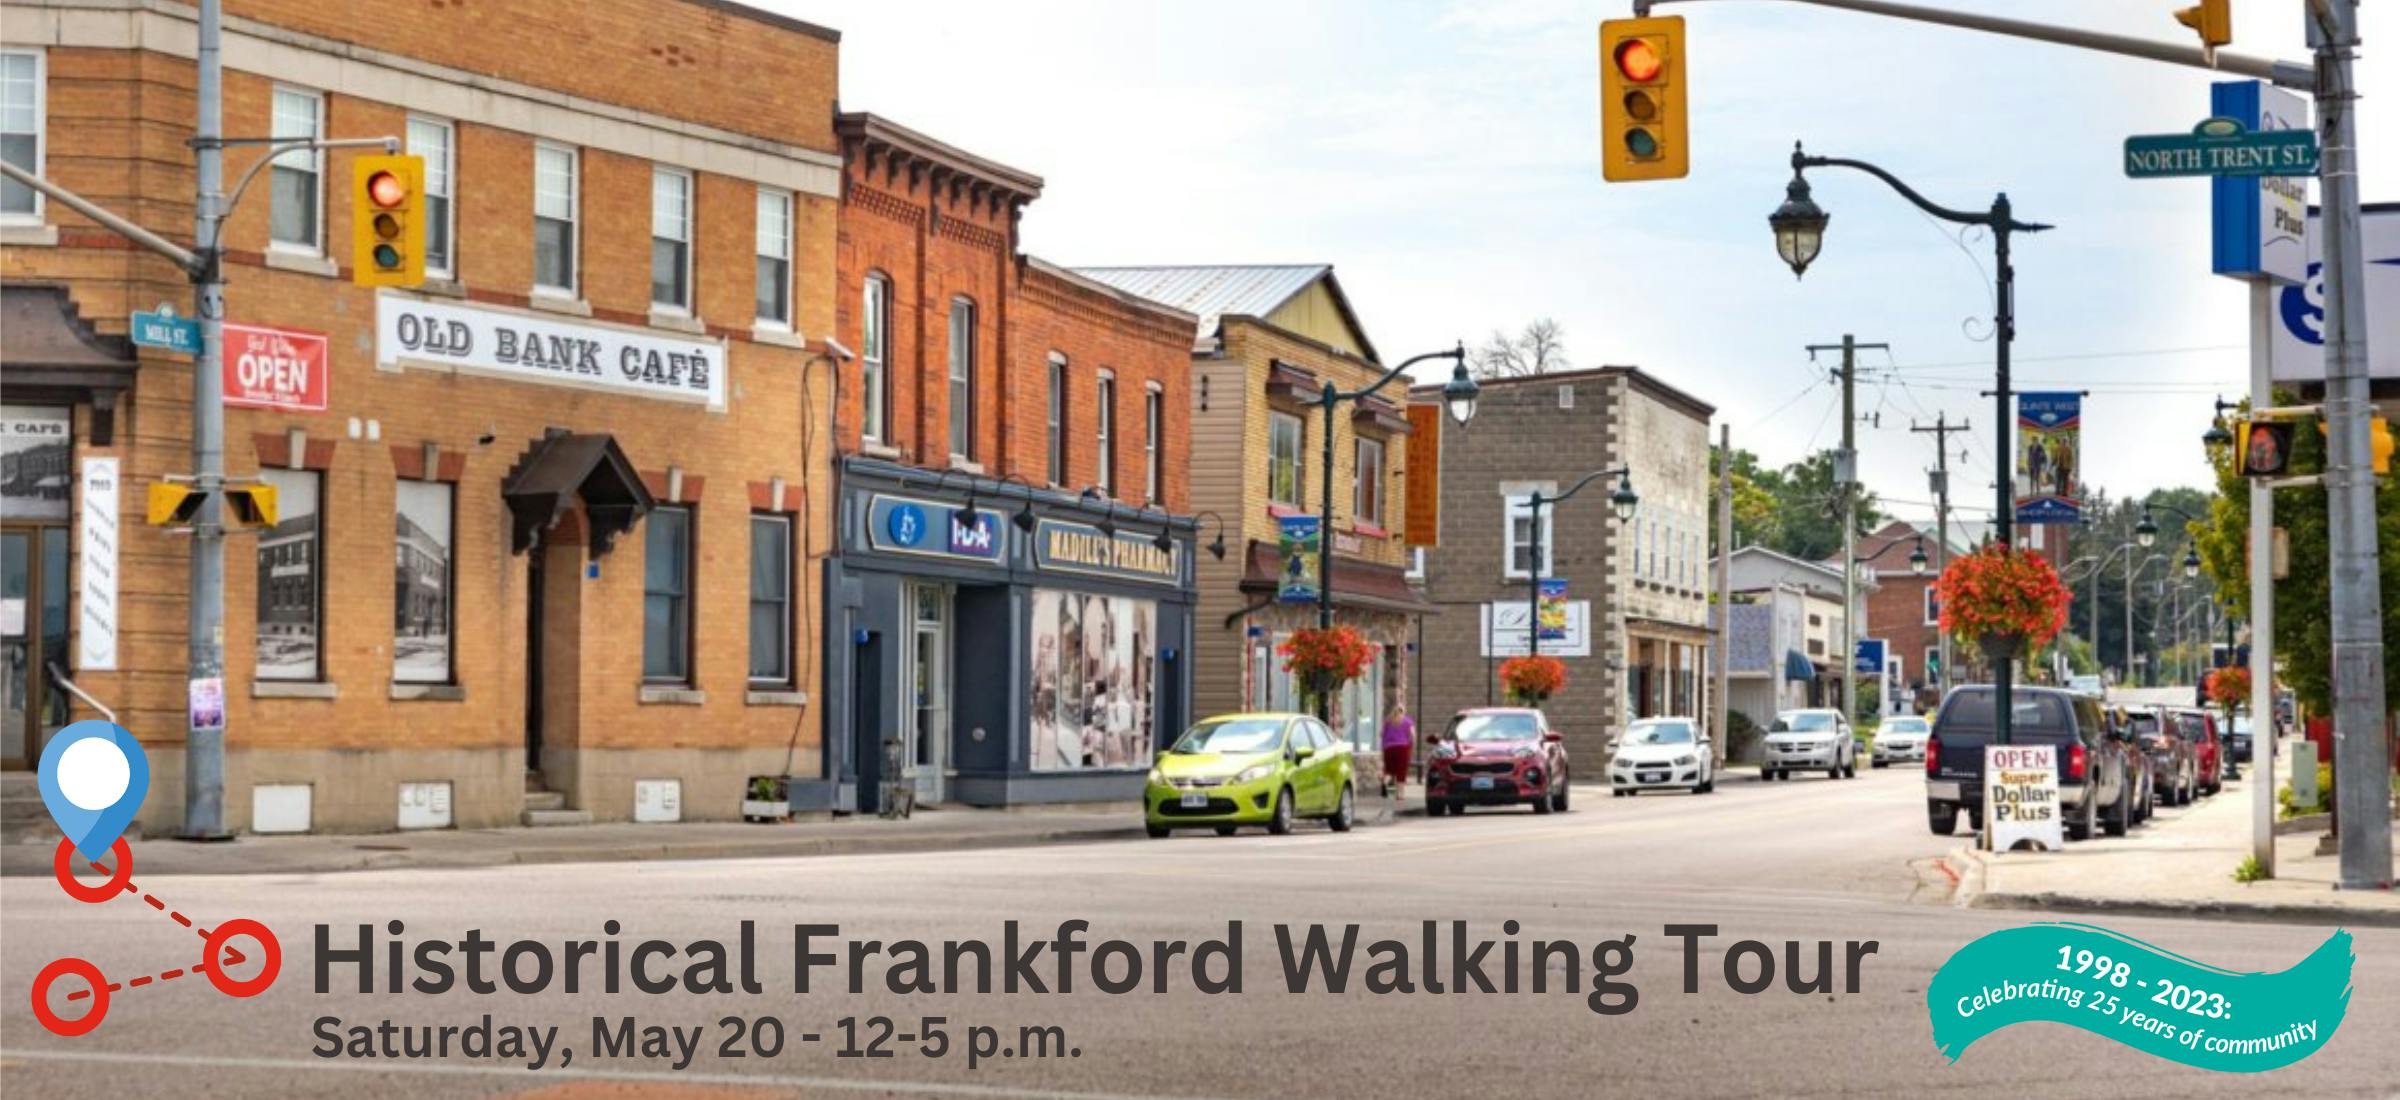 Image of Frankford main street